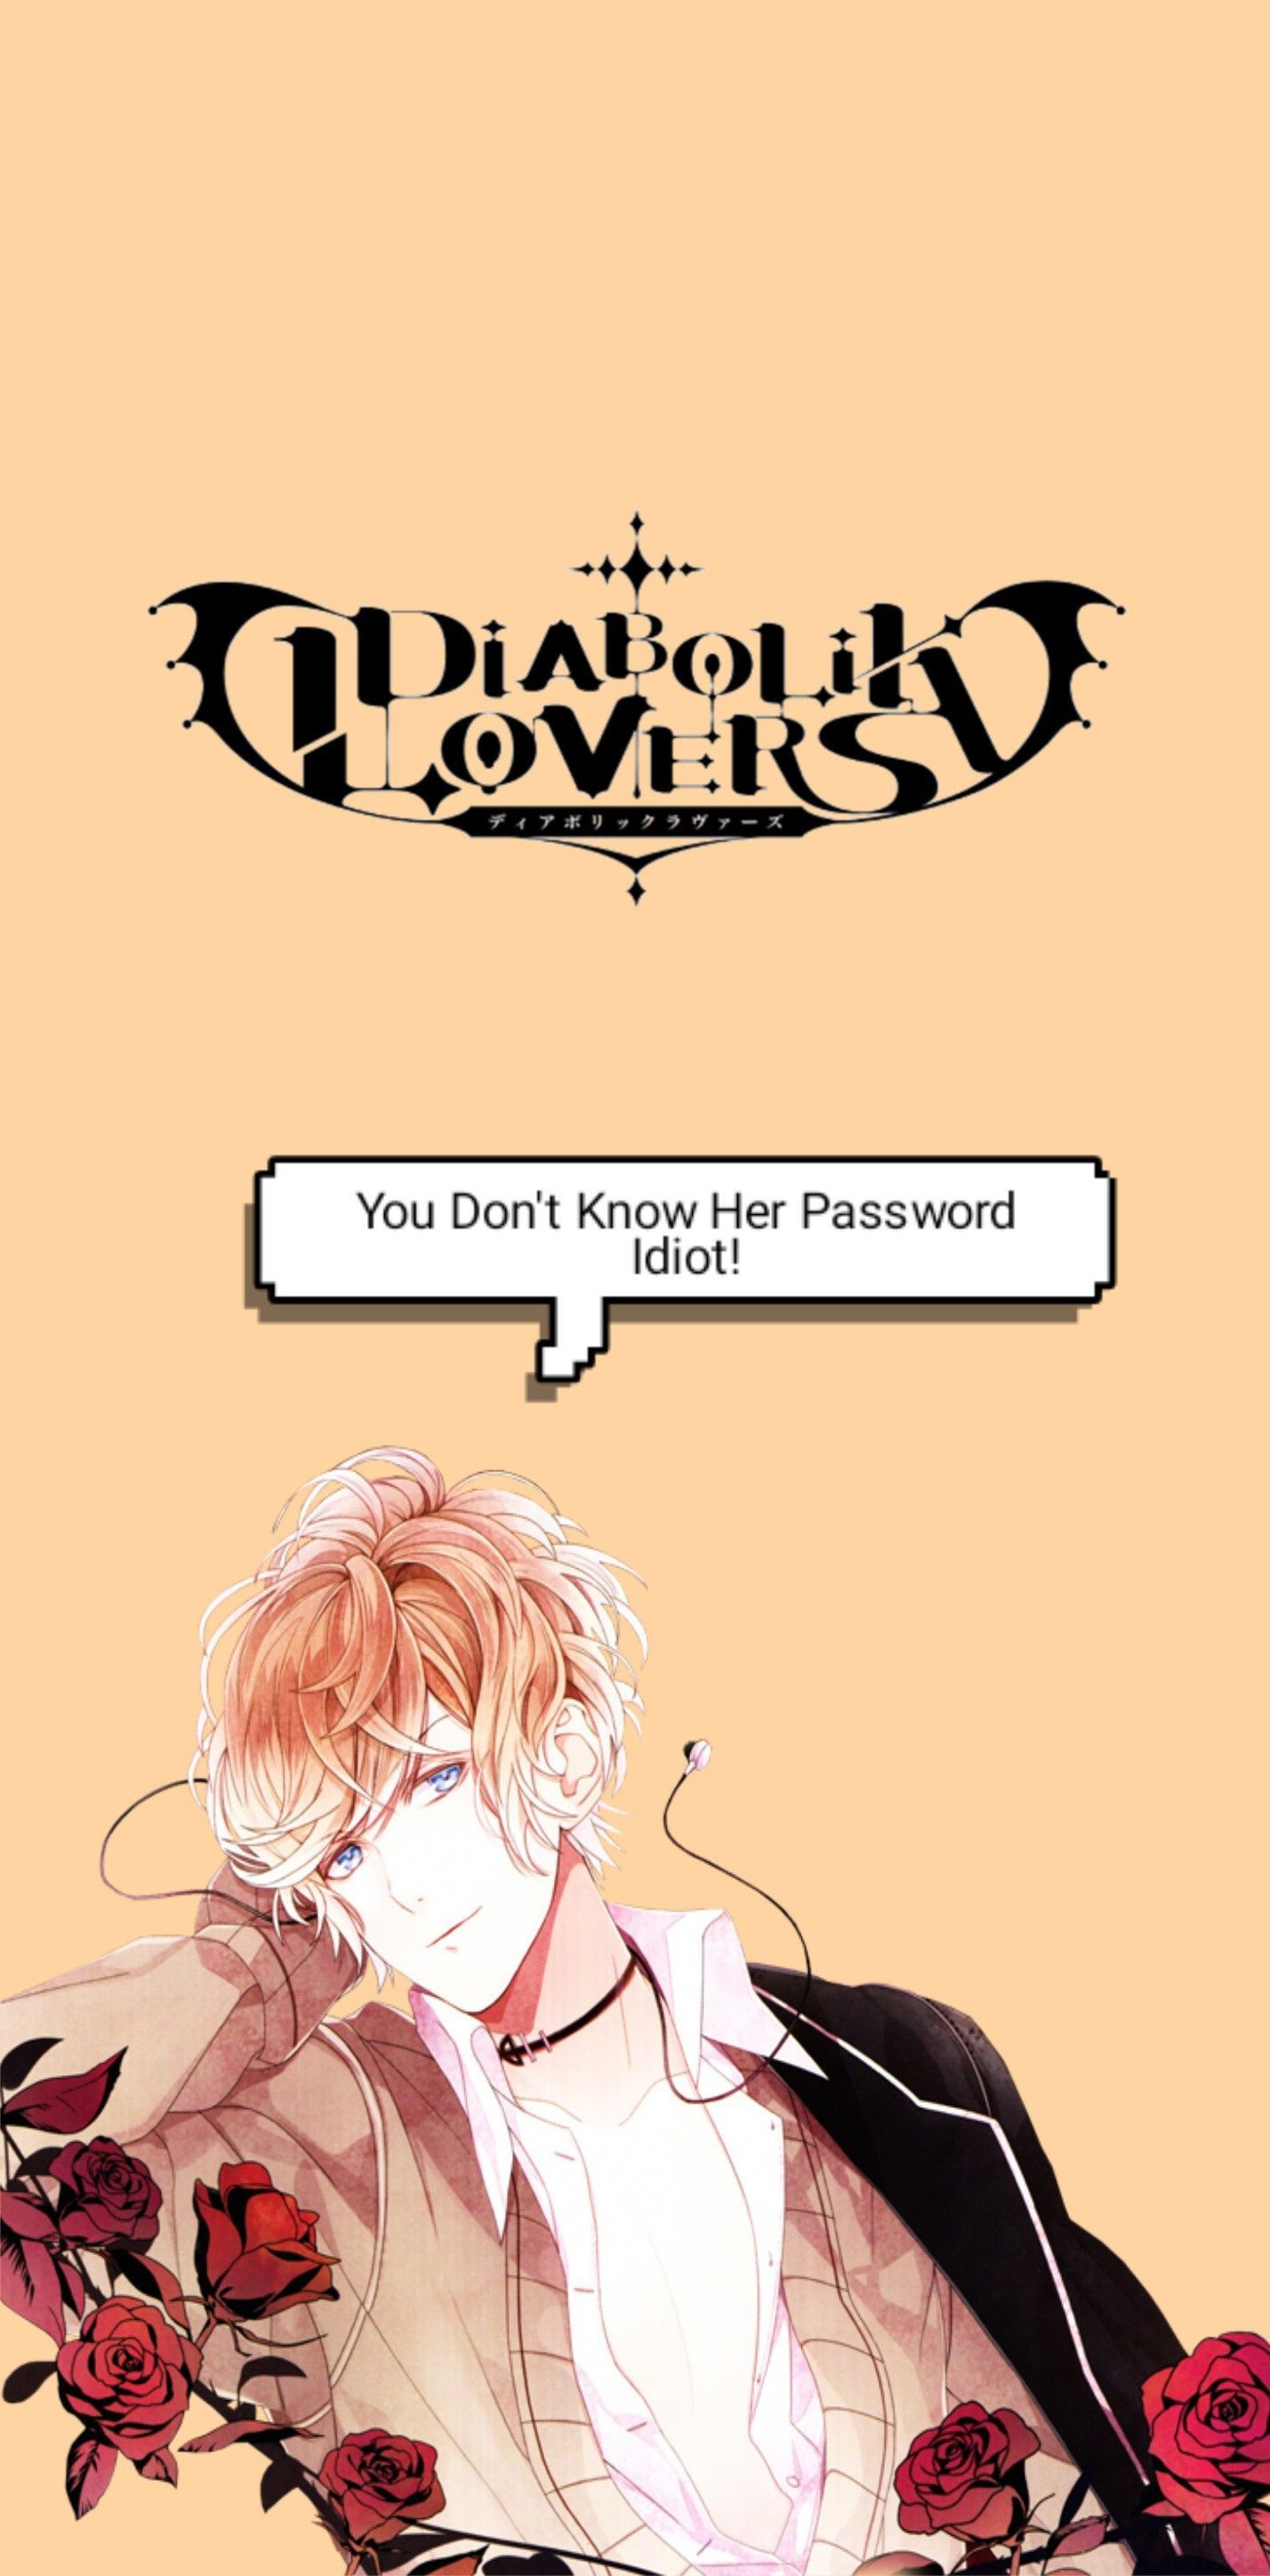 Don't touch my phone Diaboliklovers. Anime lock screen wallpaper, Anime wallpaper phone, Dont touch my phone wallpaper